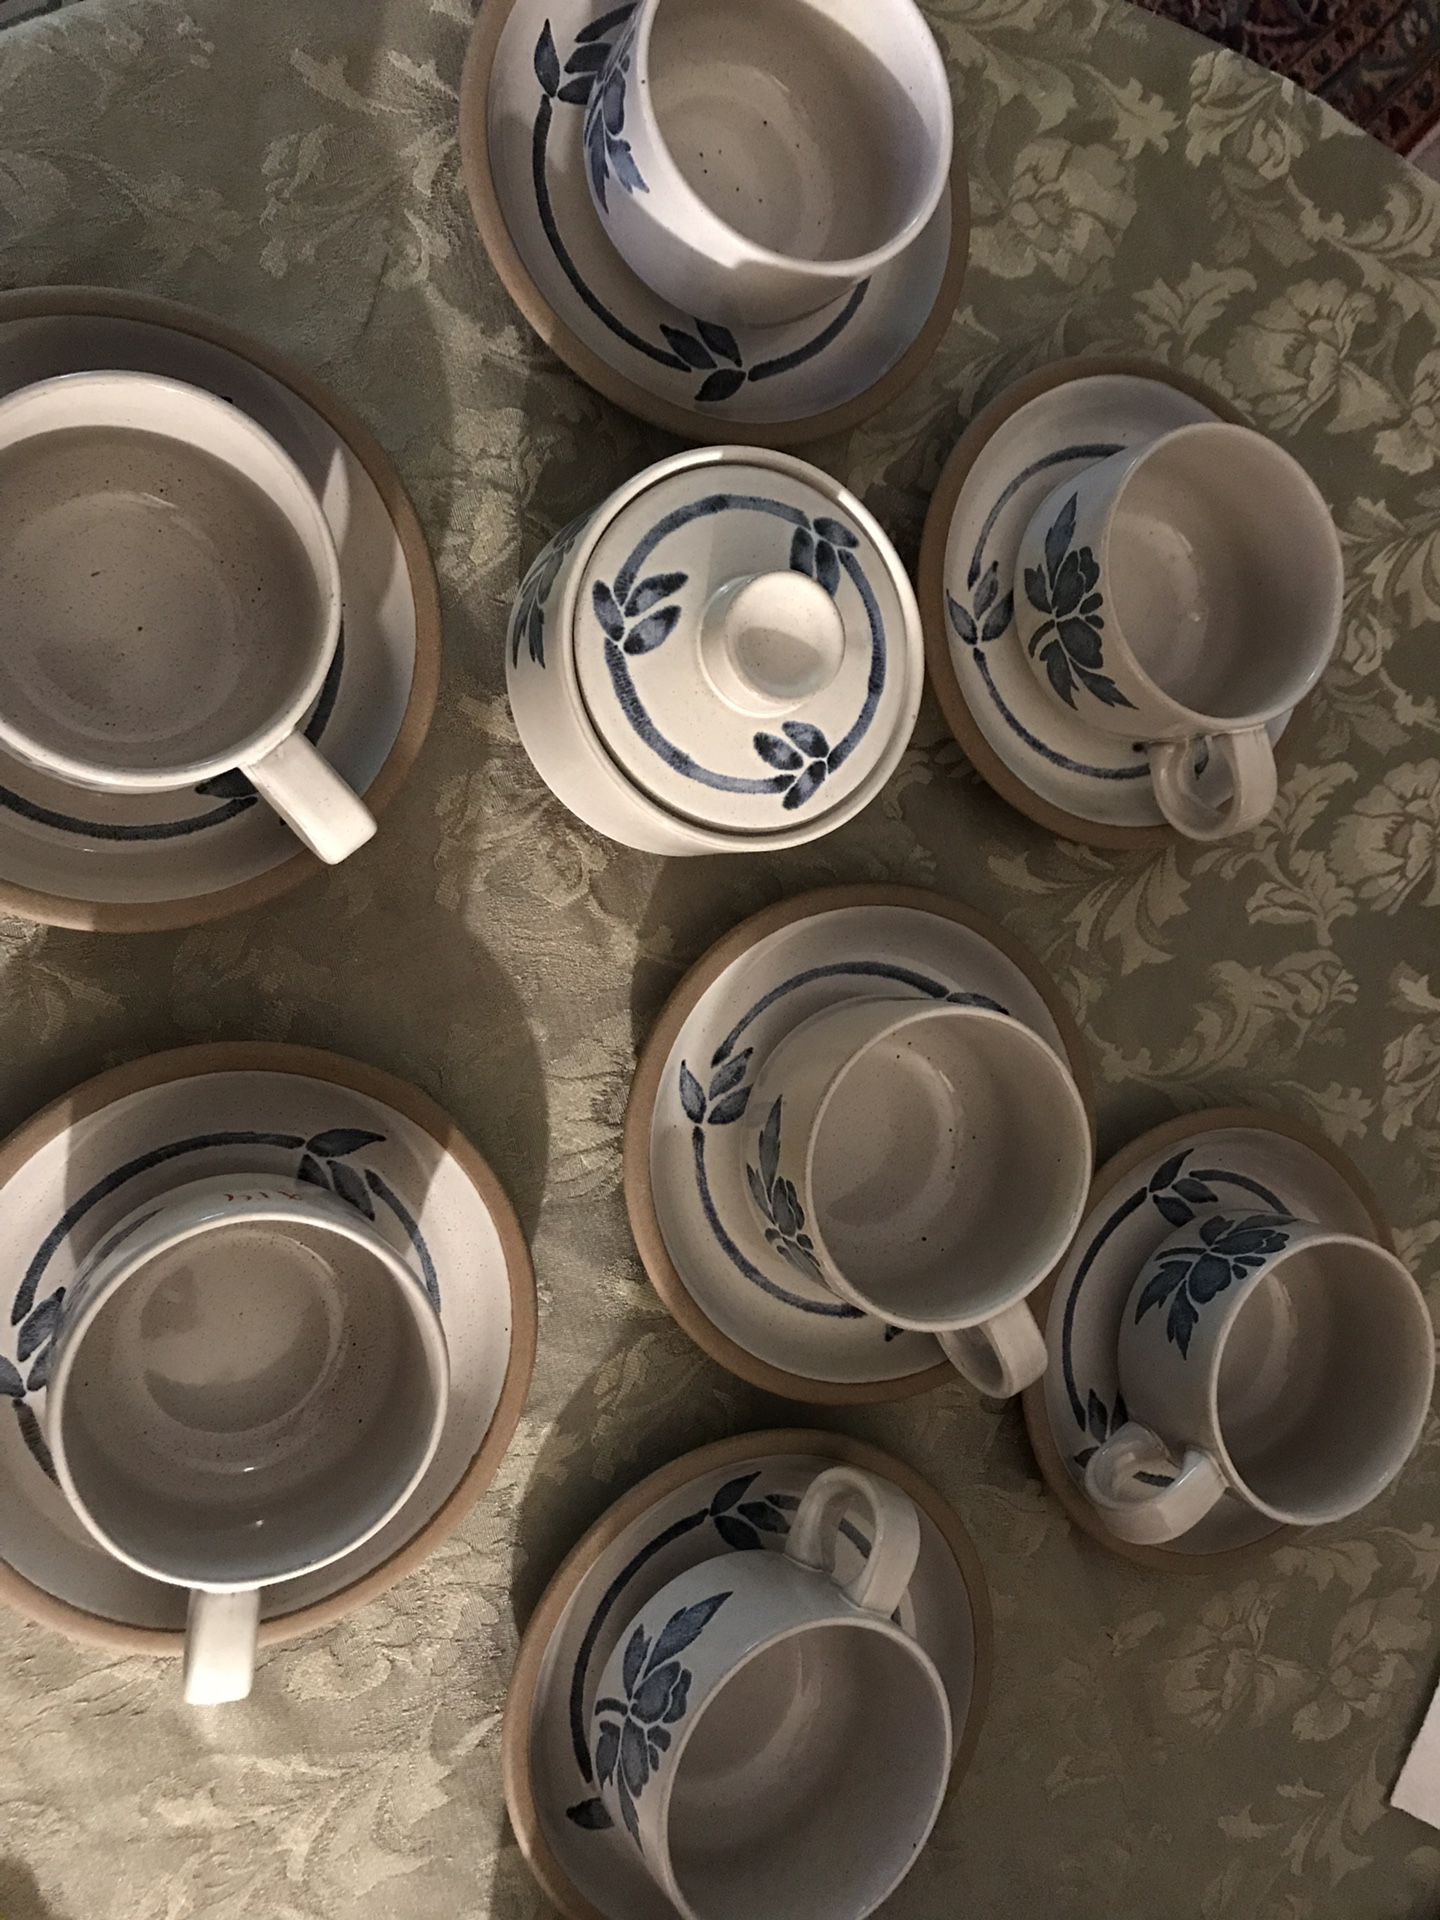 Stoneware midwinter Made in England 6 cups and saucers + sugar bowl